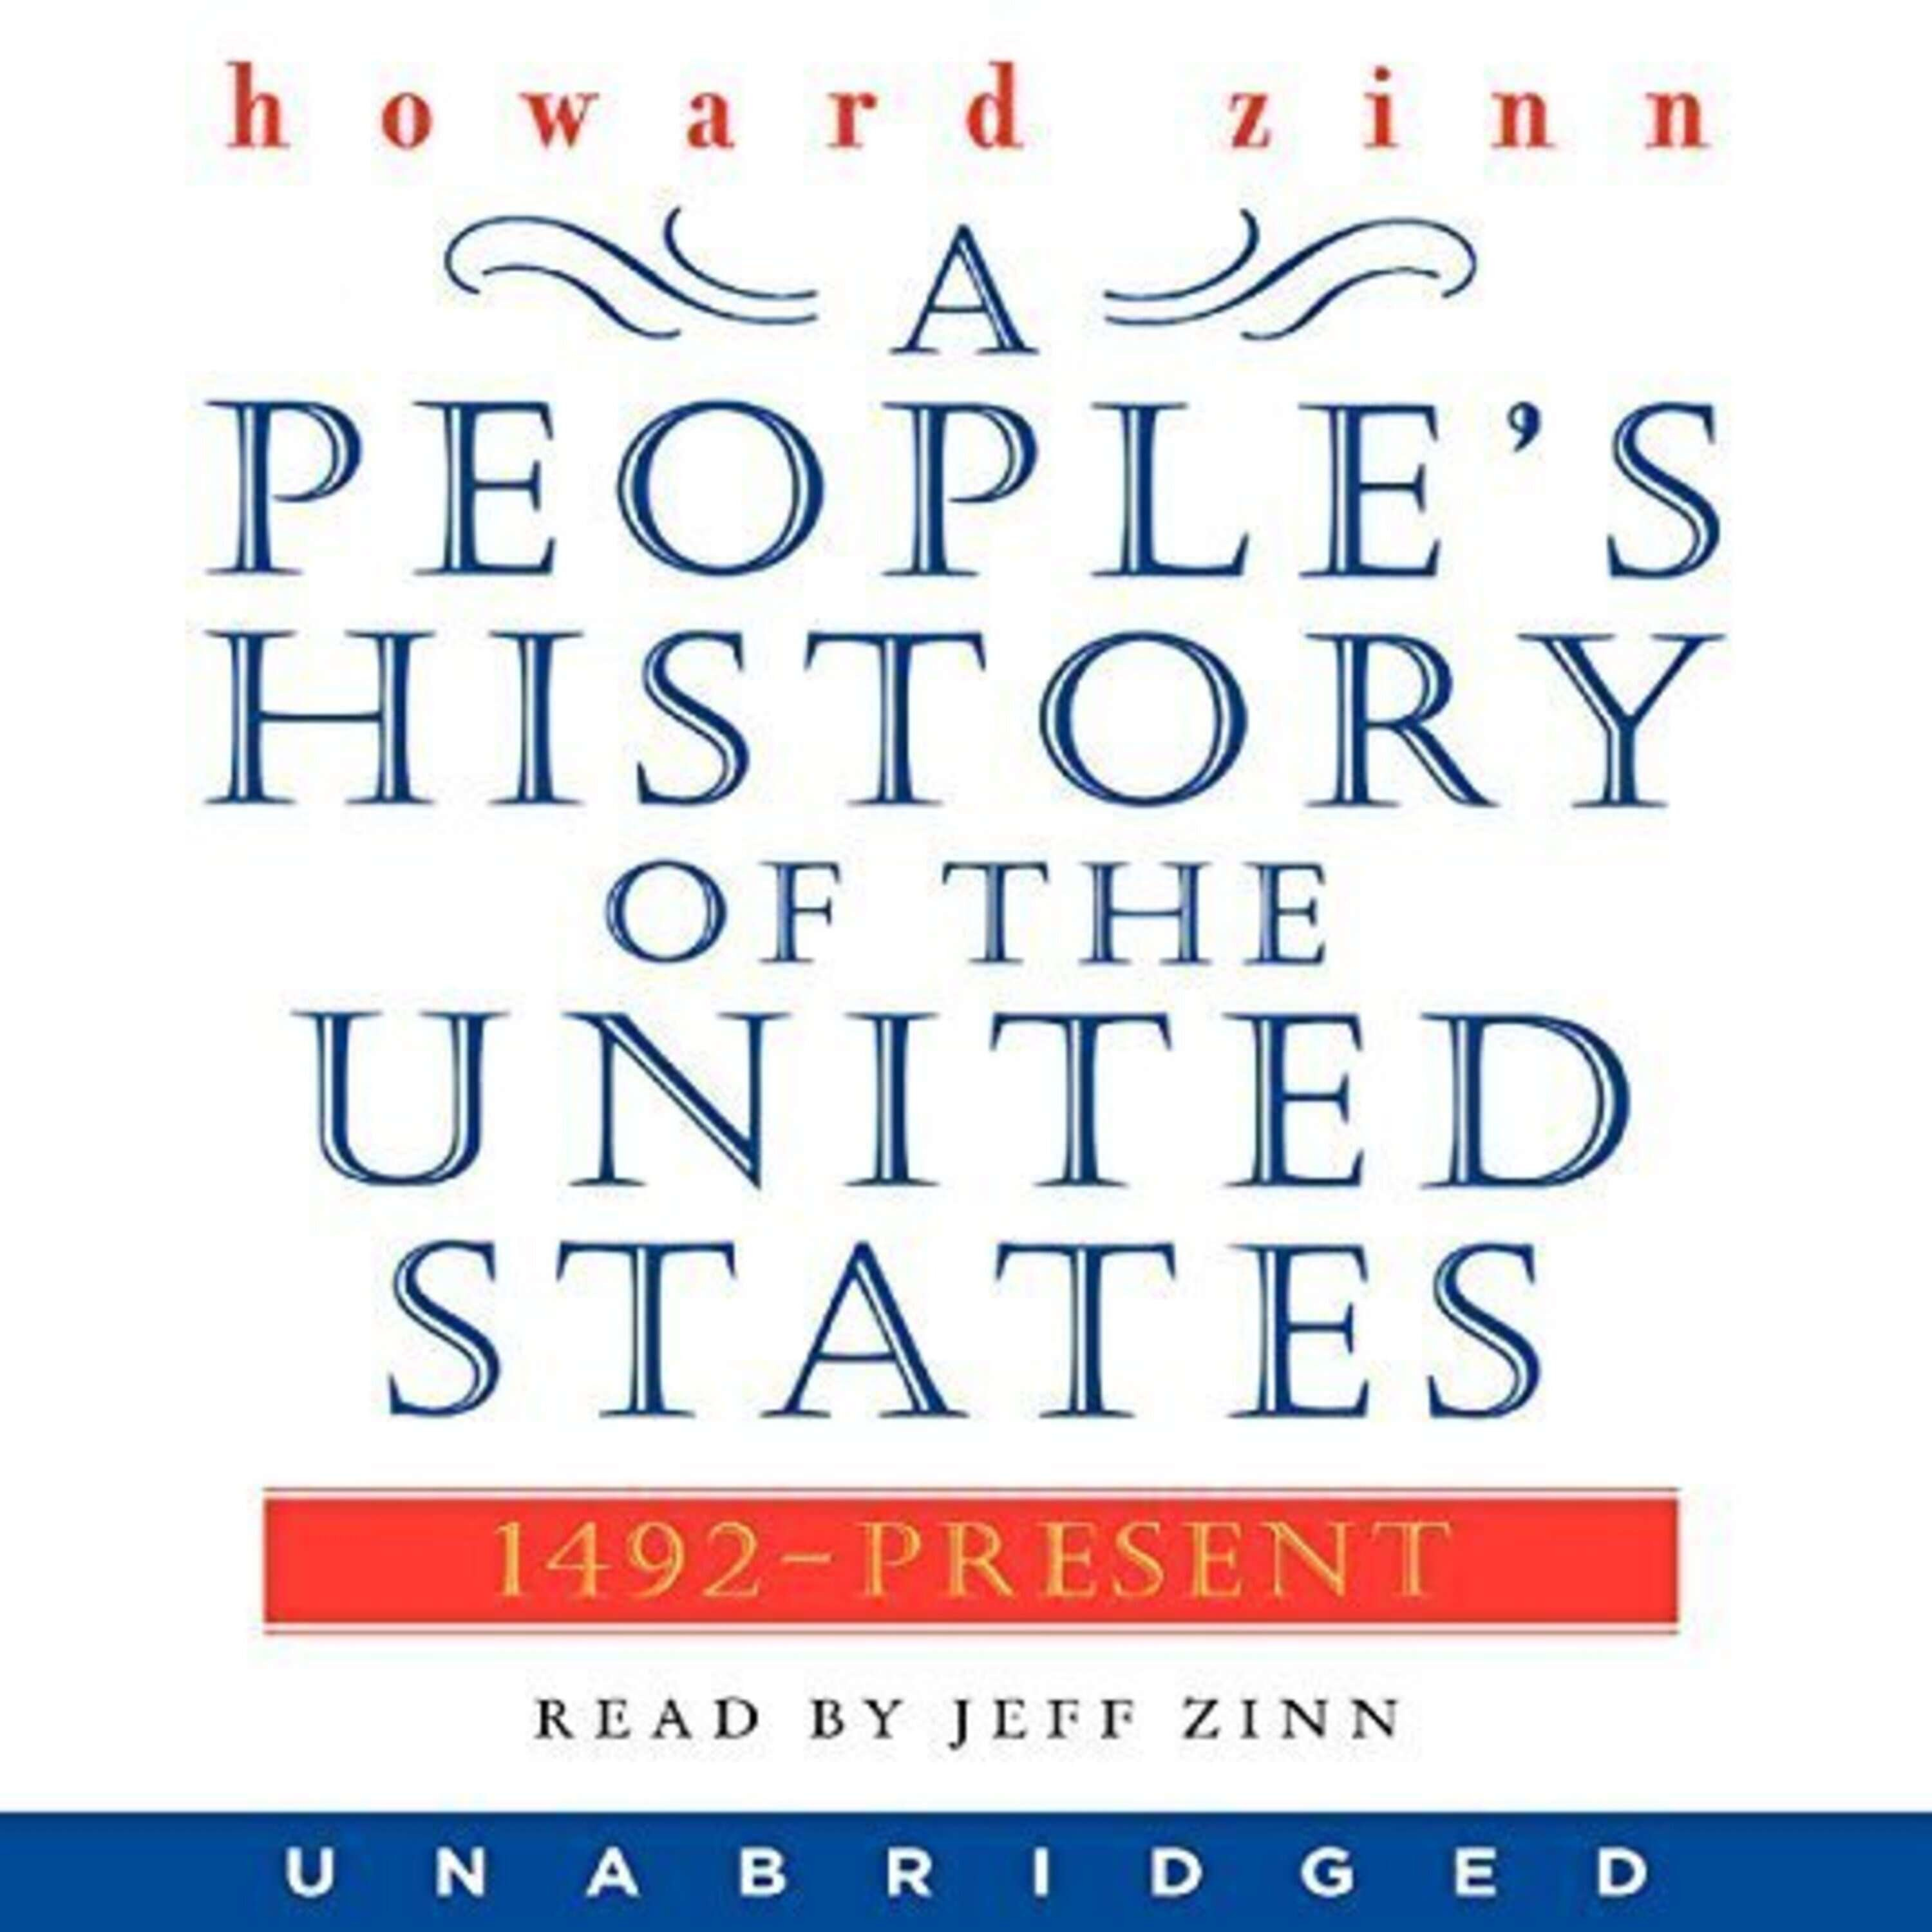 Part Two - A People’s History of the United States; Howard Zinn